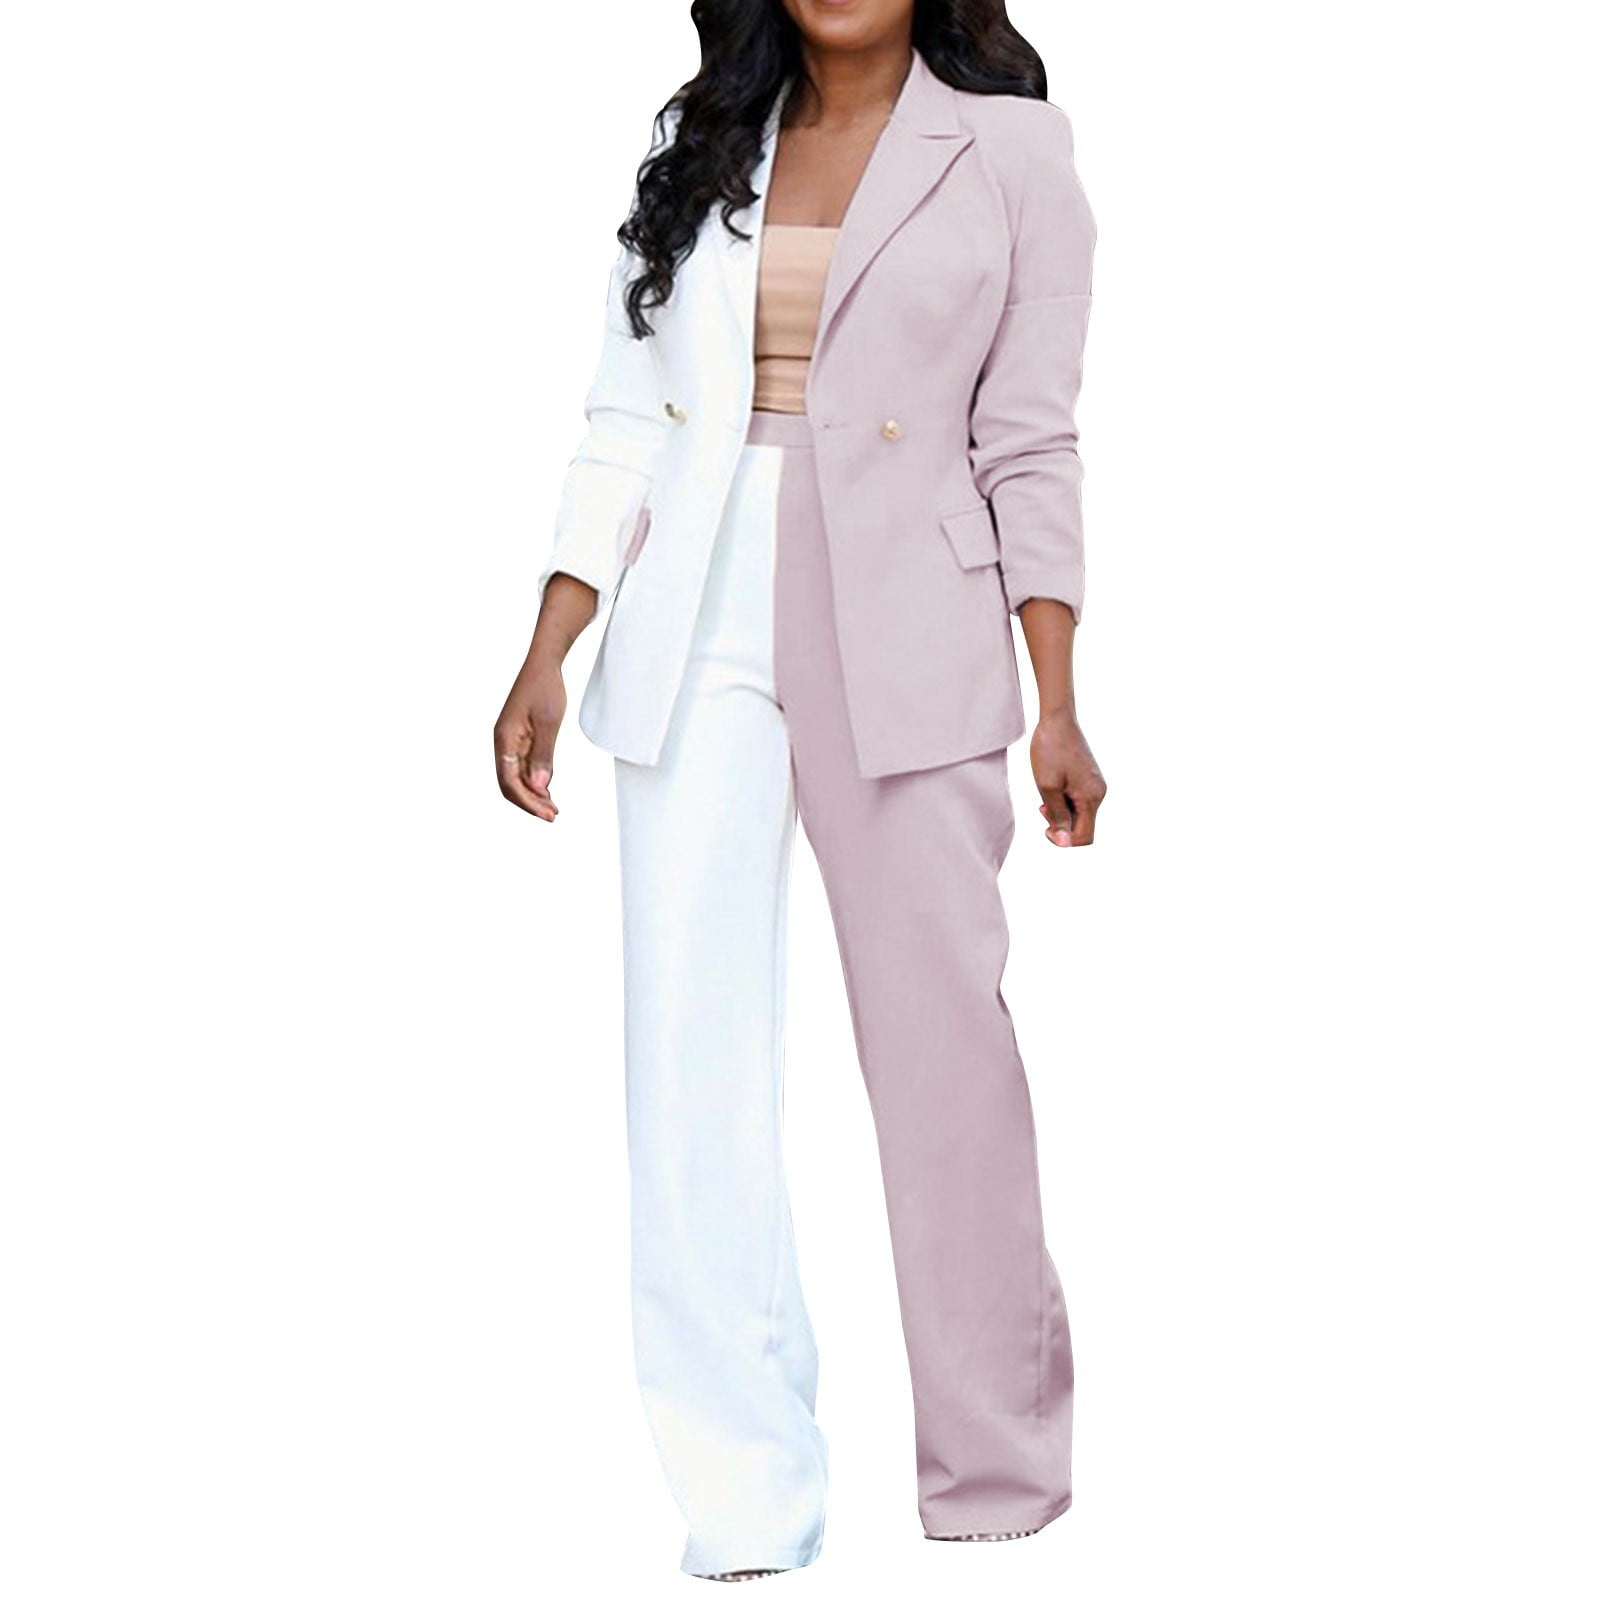 NKOOGH Wedding Pant Suits Petite Size Two Piece for Women Pants